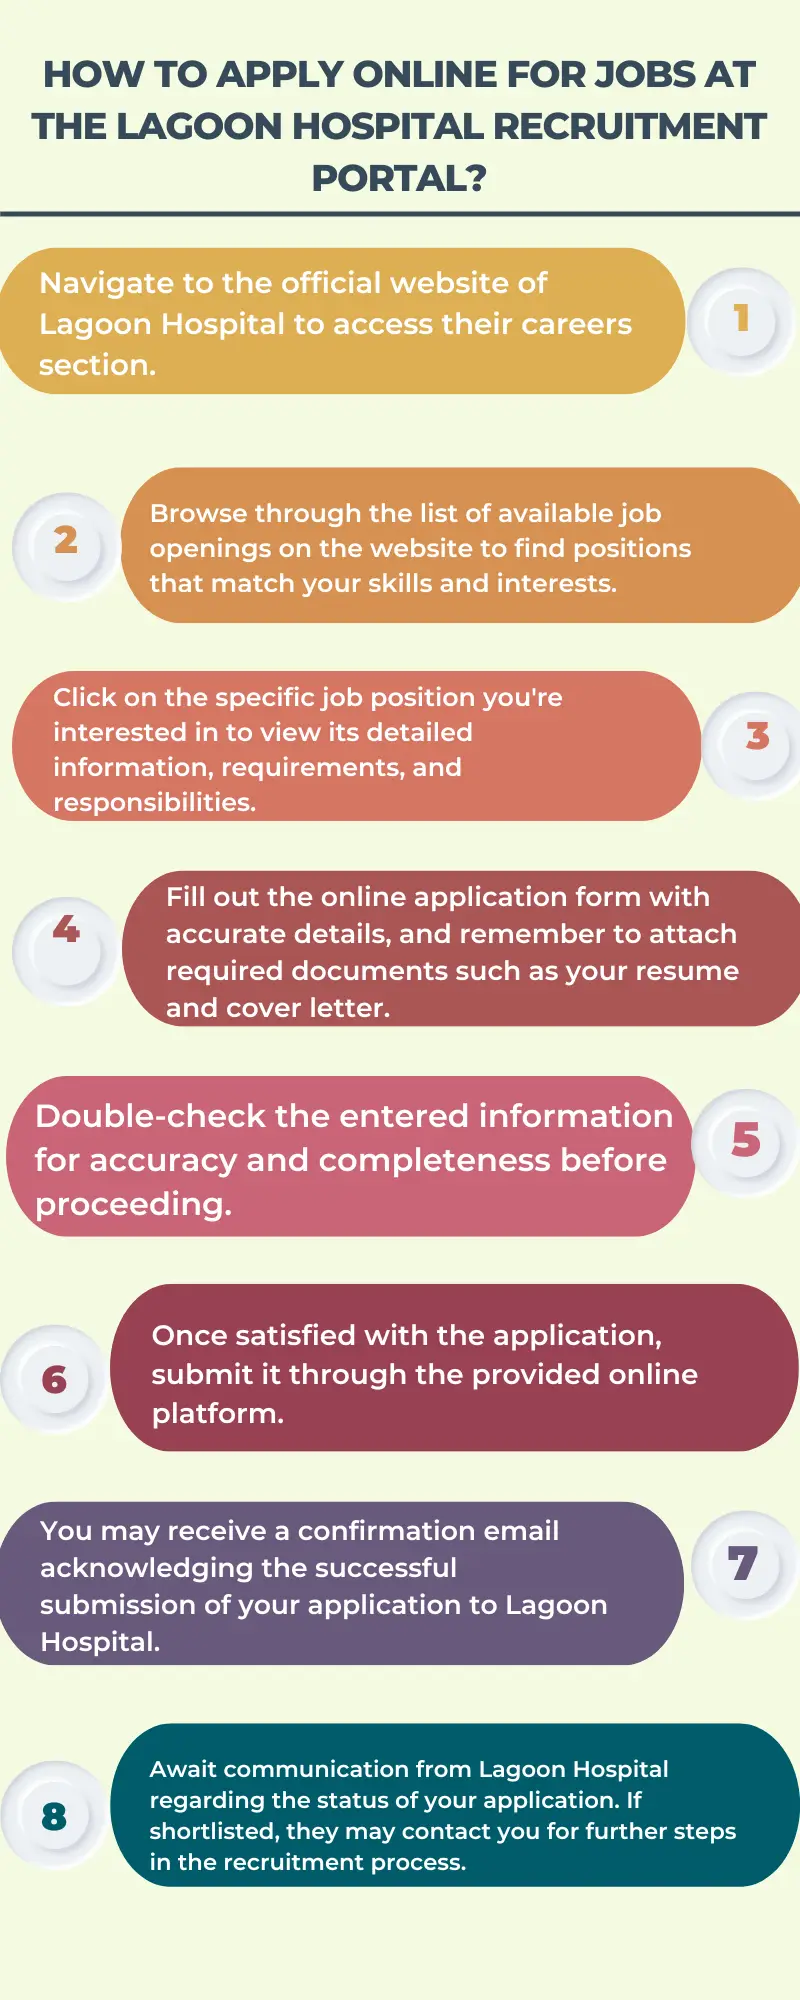 How to Apply Online for Jobs at the Lagoon Hospital Recruitment Portal?